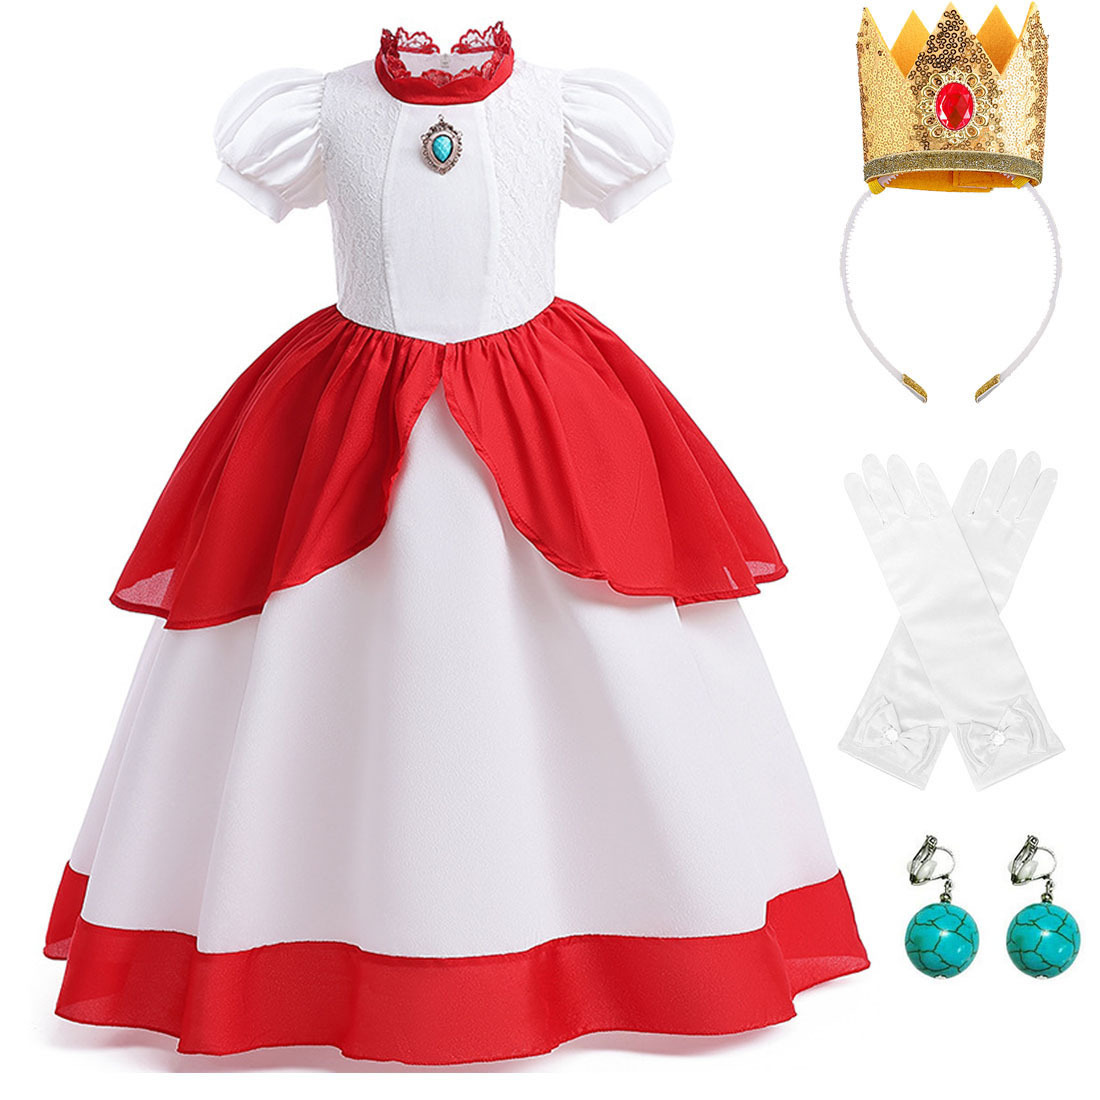 SUEE Princess Peach Costume for Girls Deluxe Fancy Dress Up Outfit with Accessories - image 1 of 7